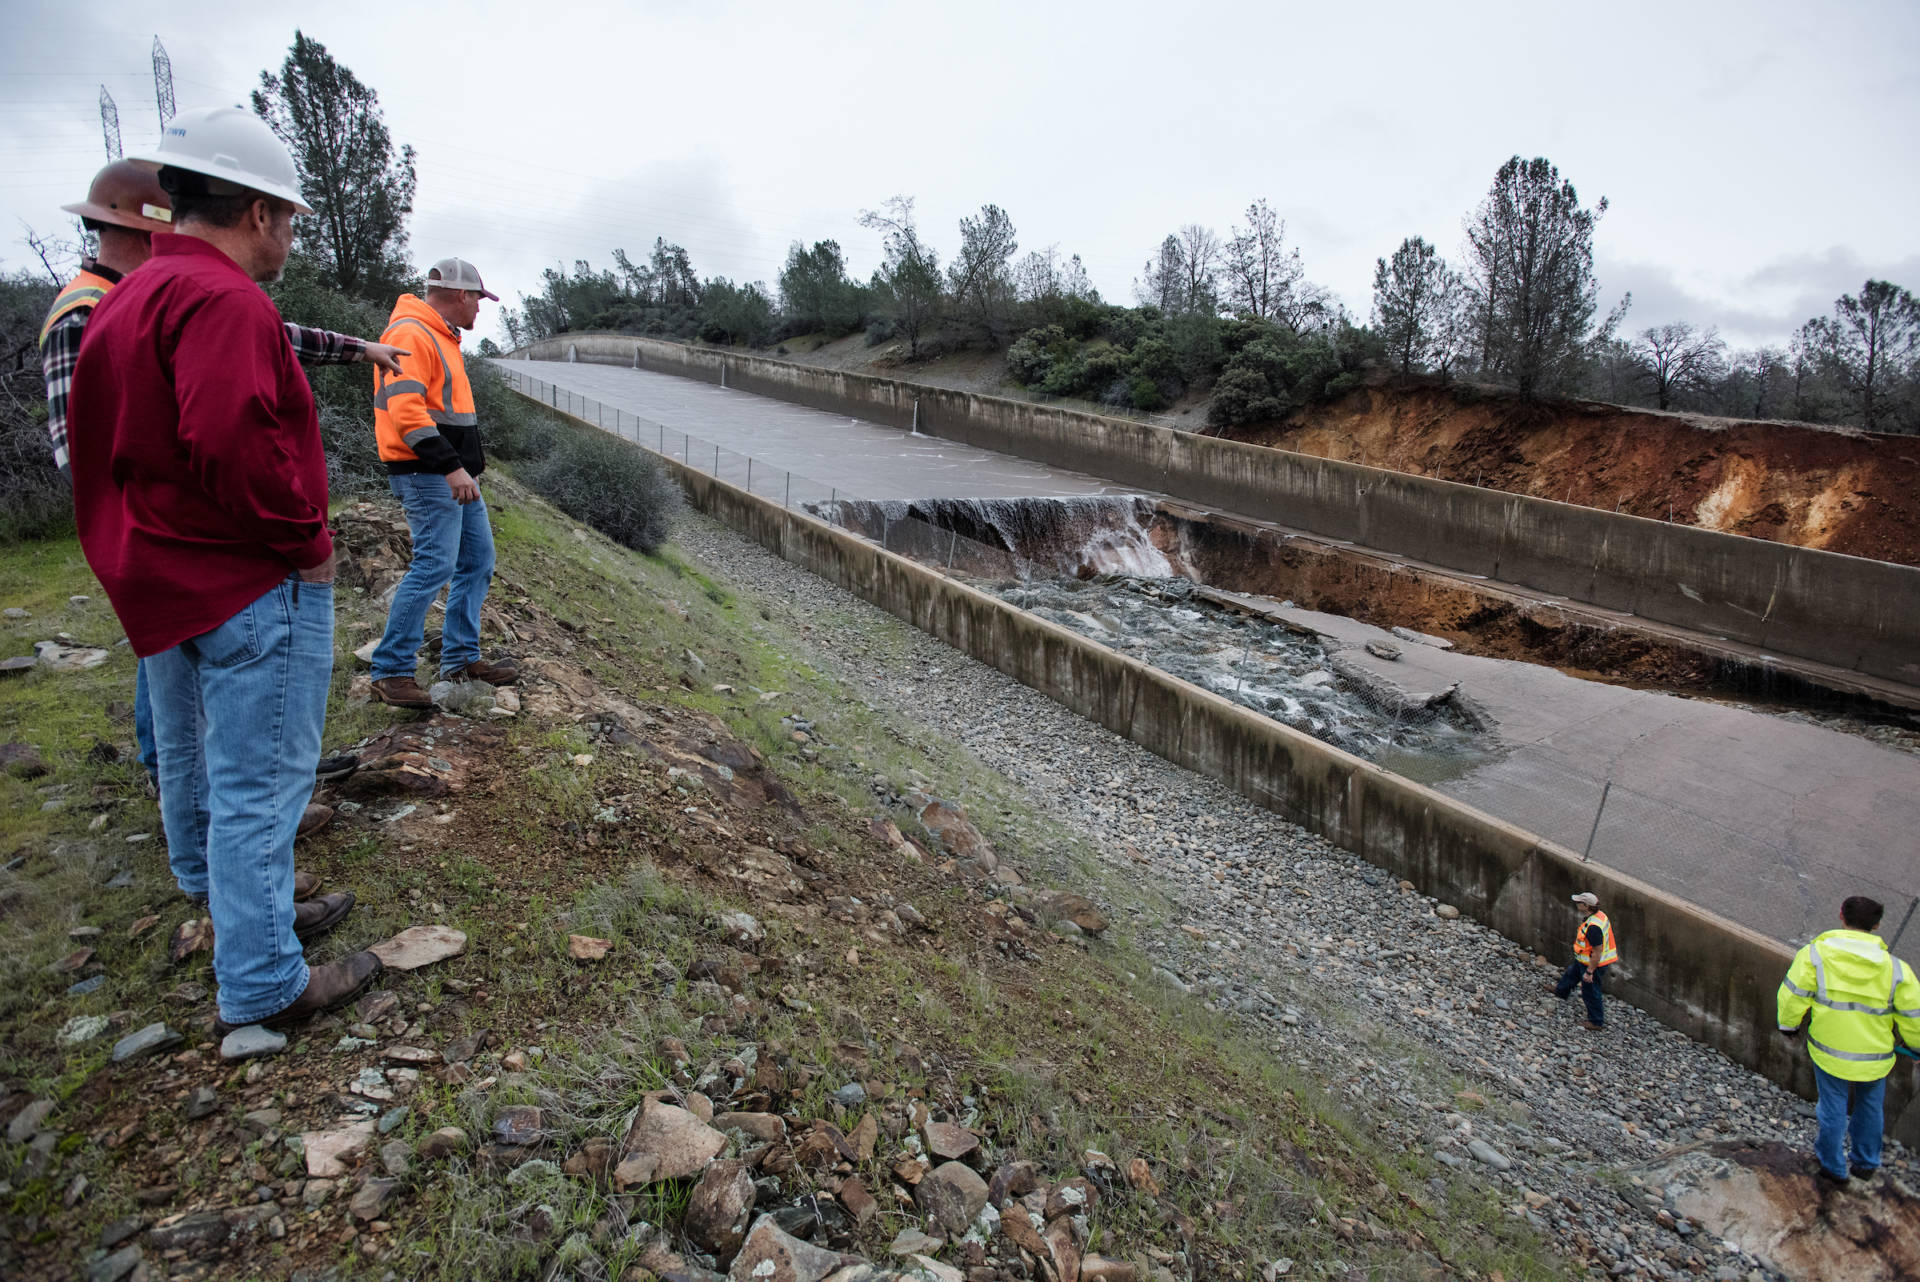 California Department of Water Resources workers inspected damage to the spillway at Oroville Dam after a breach appeared on Feb. 7, 2017. Kelly M. Grow/DWR